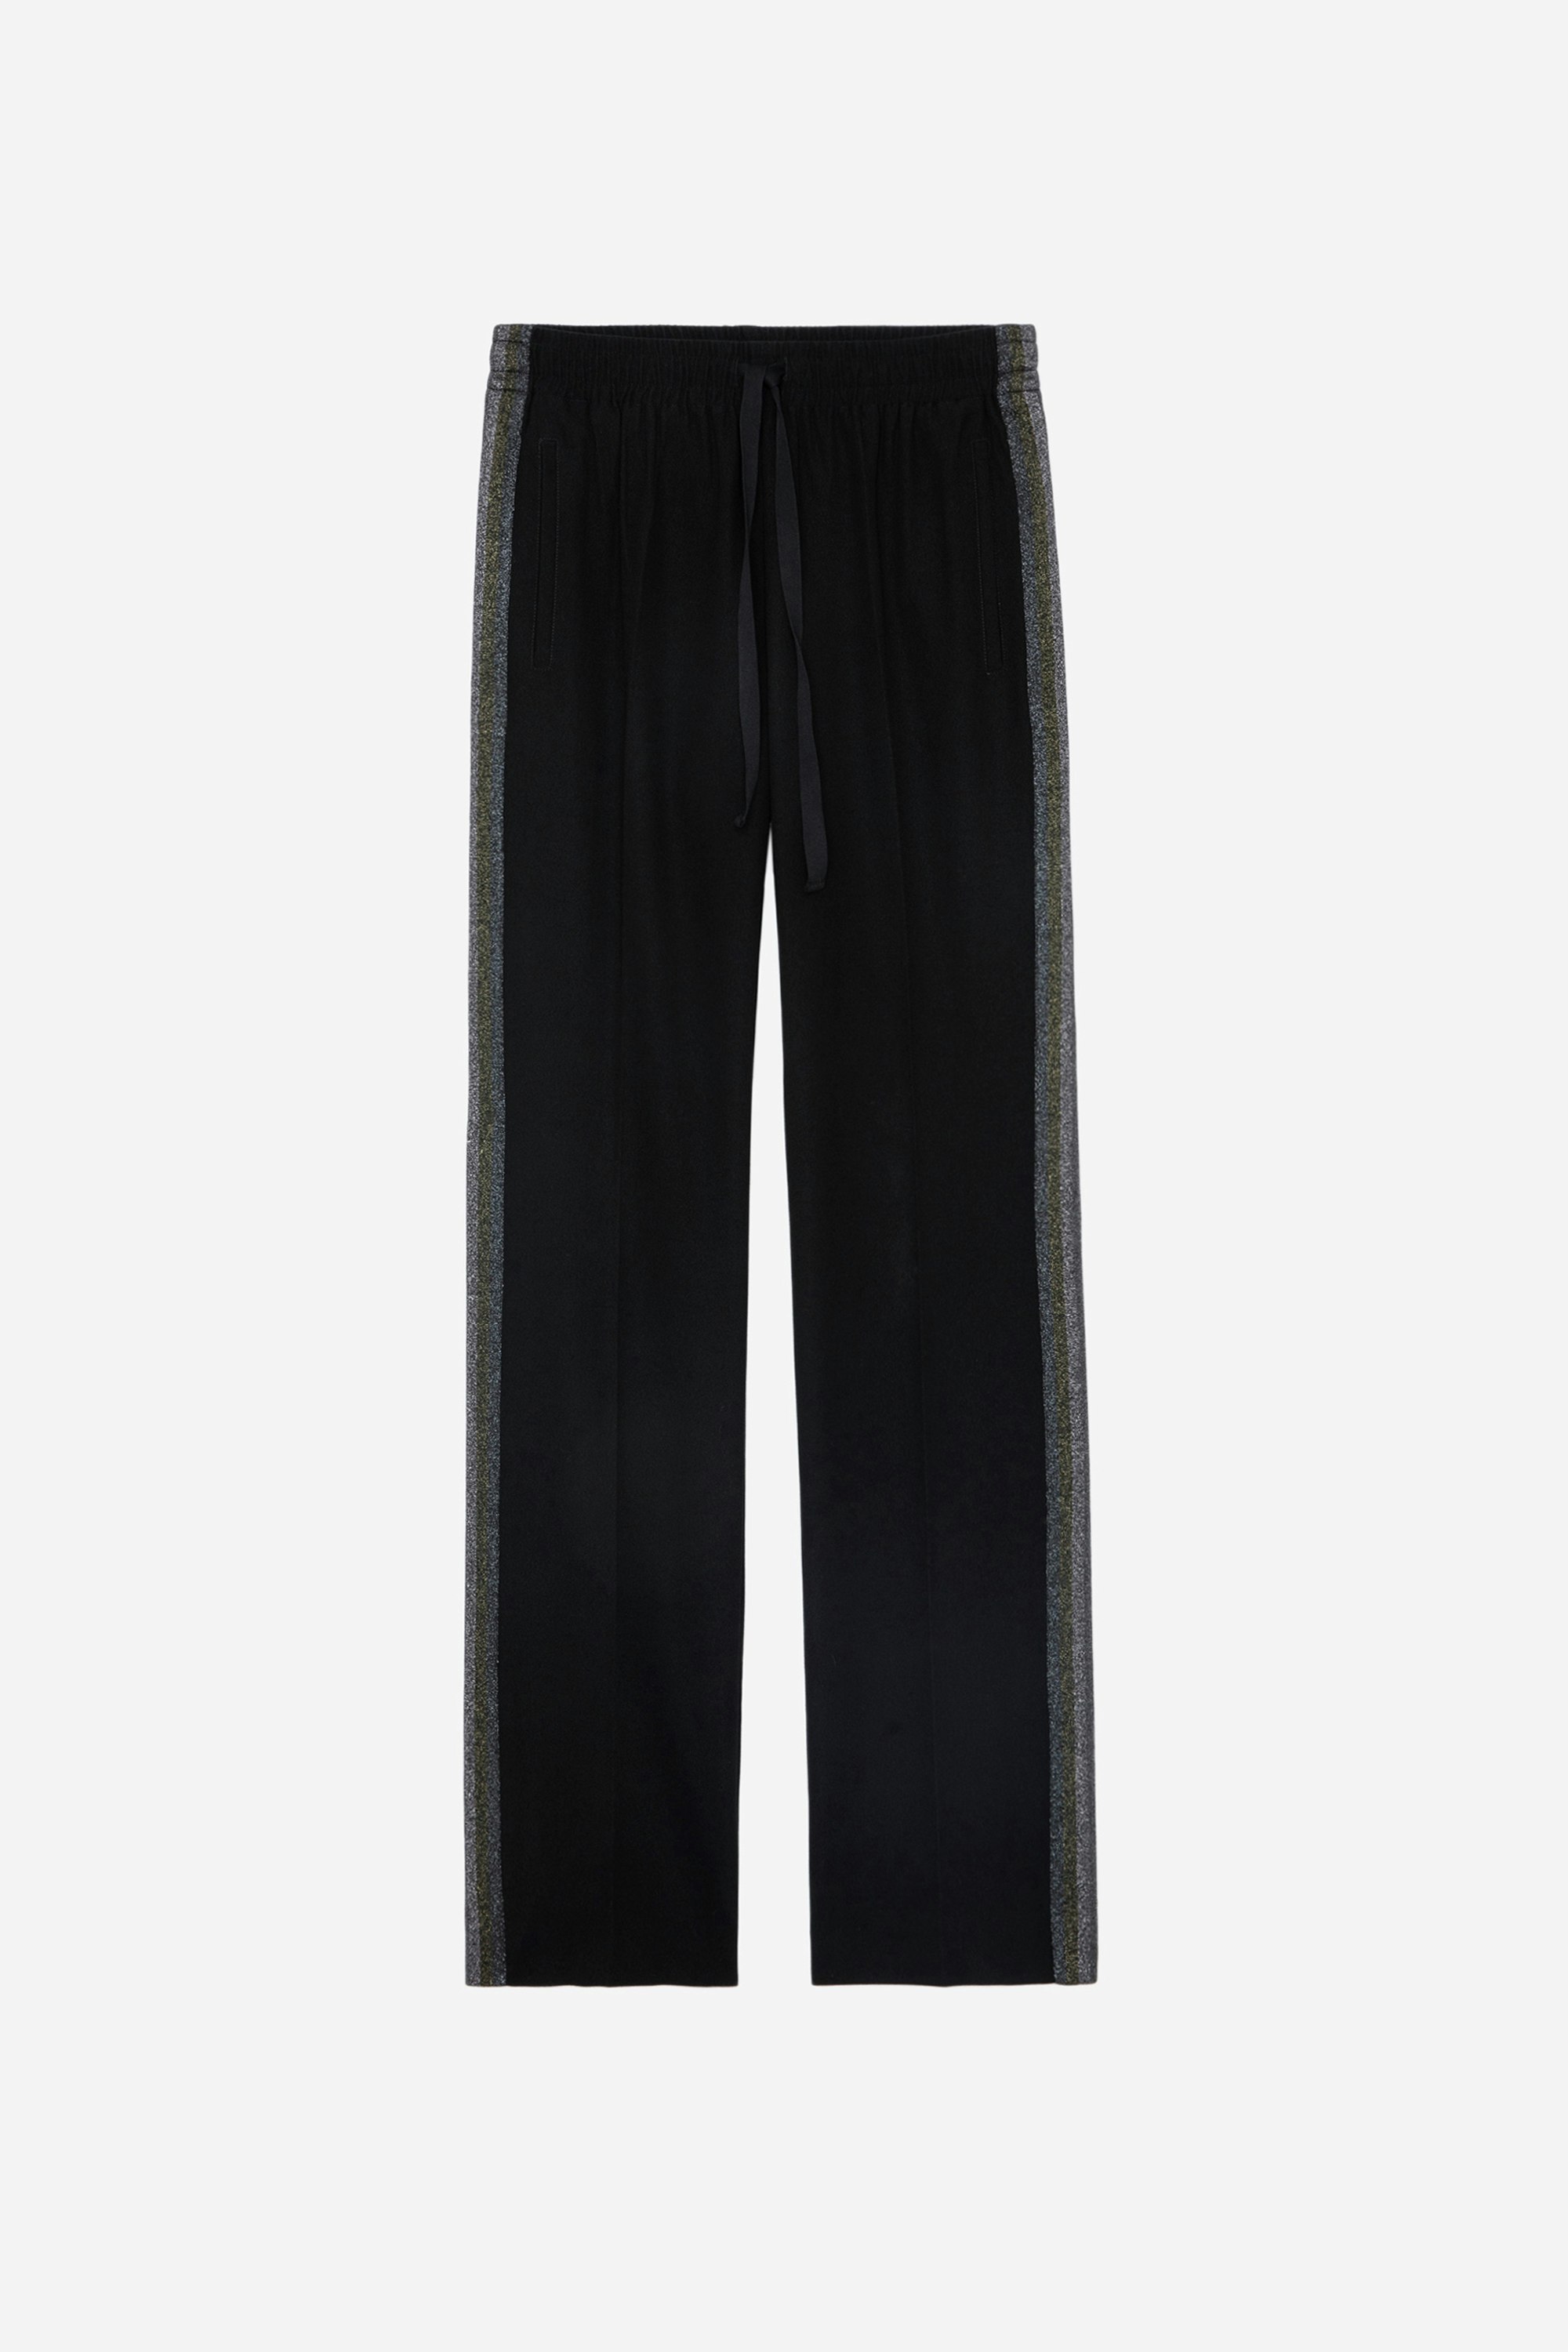 Pomy Pants - Women's black pants with glittery side bands